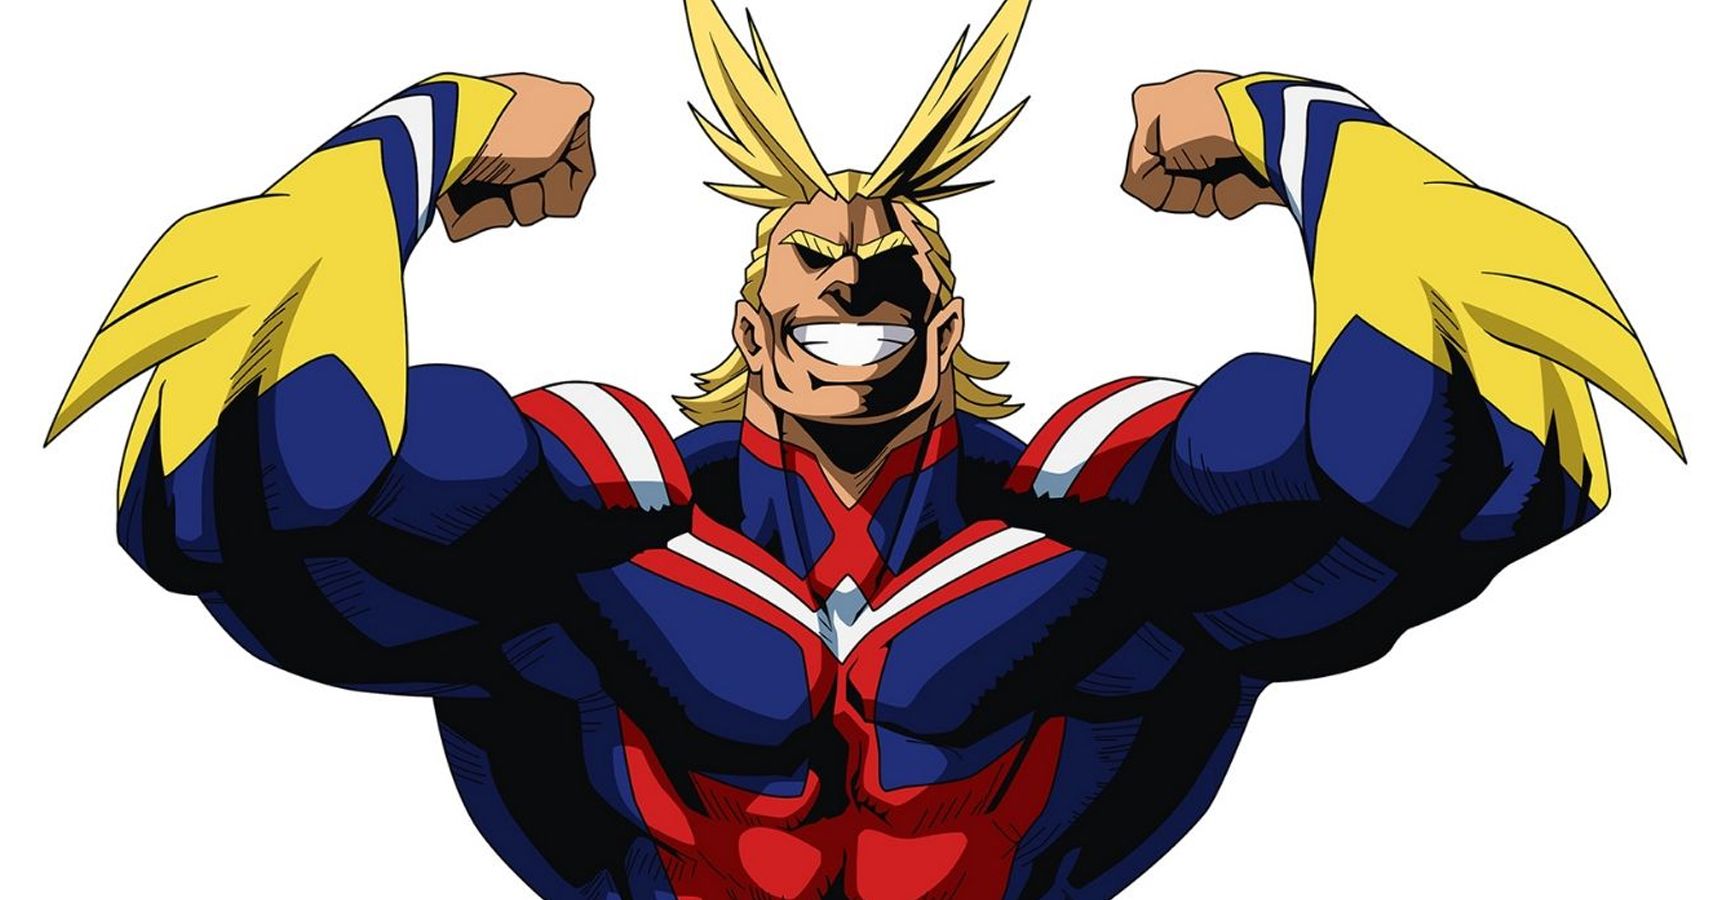 Roblox Catalog All Might